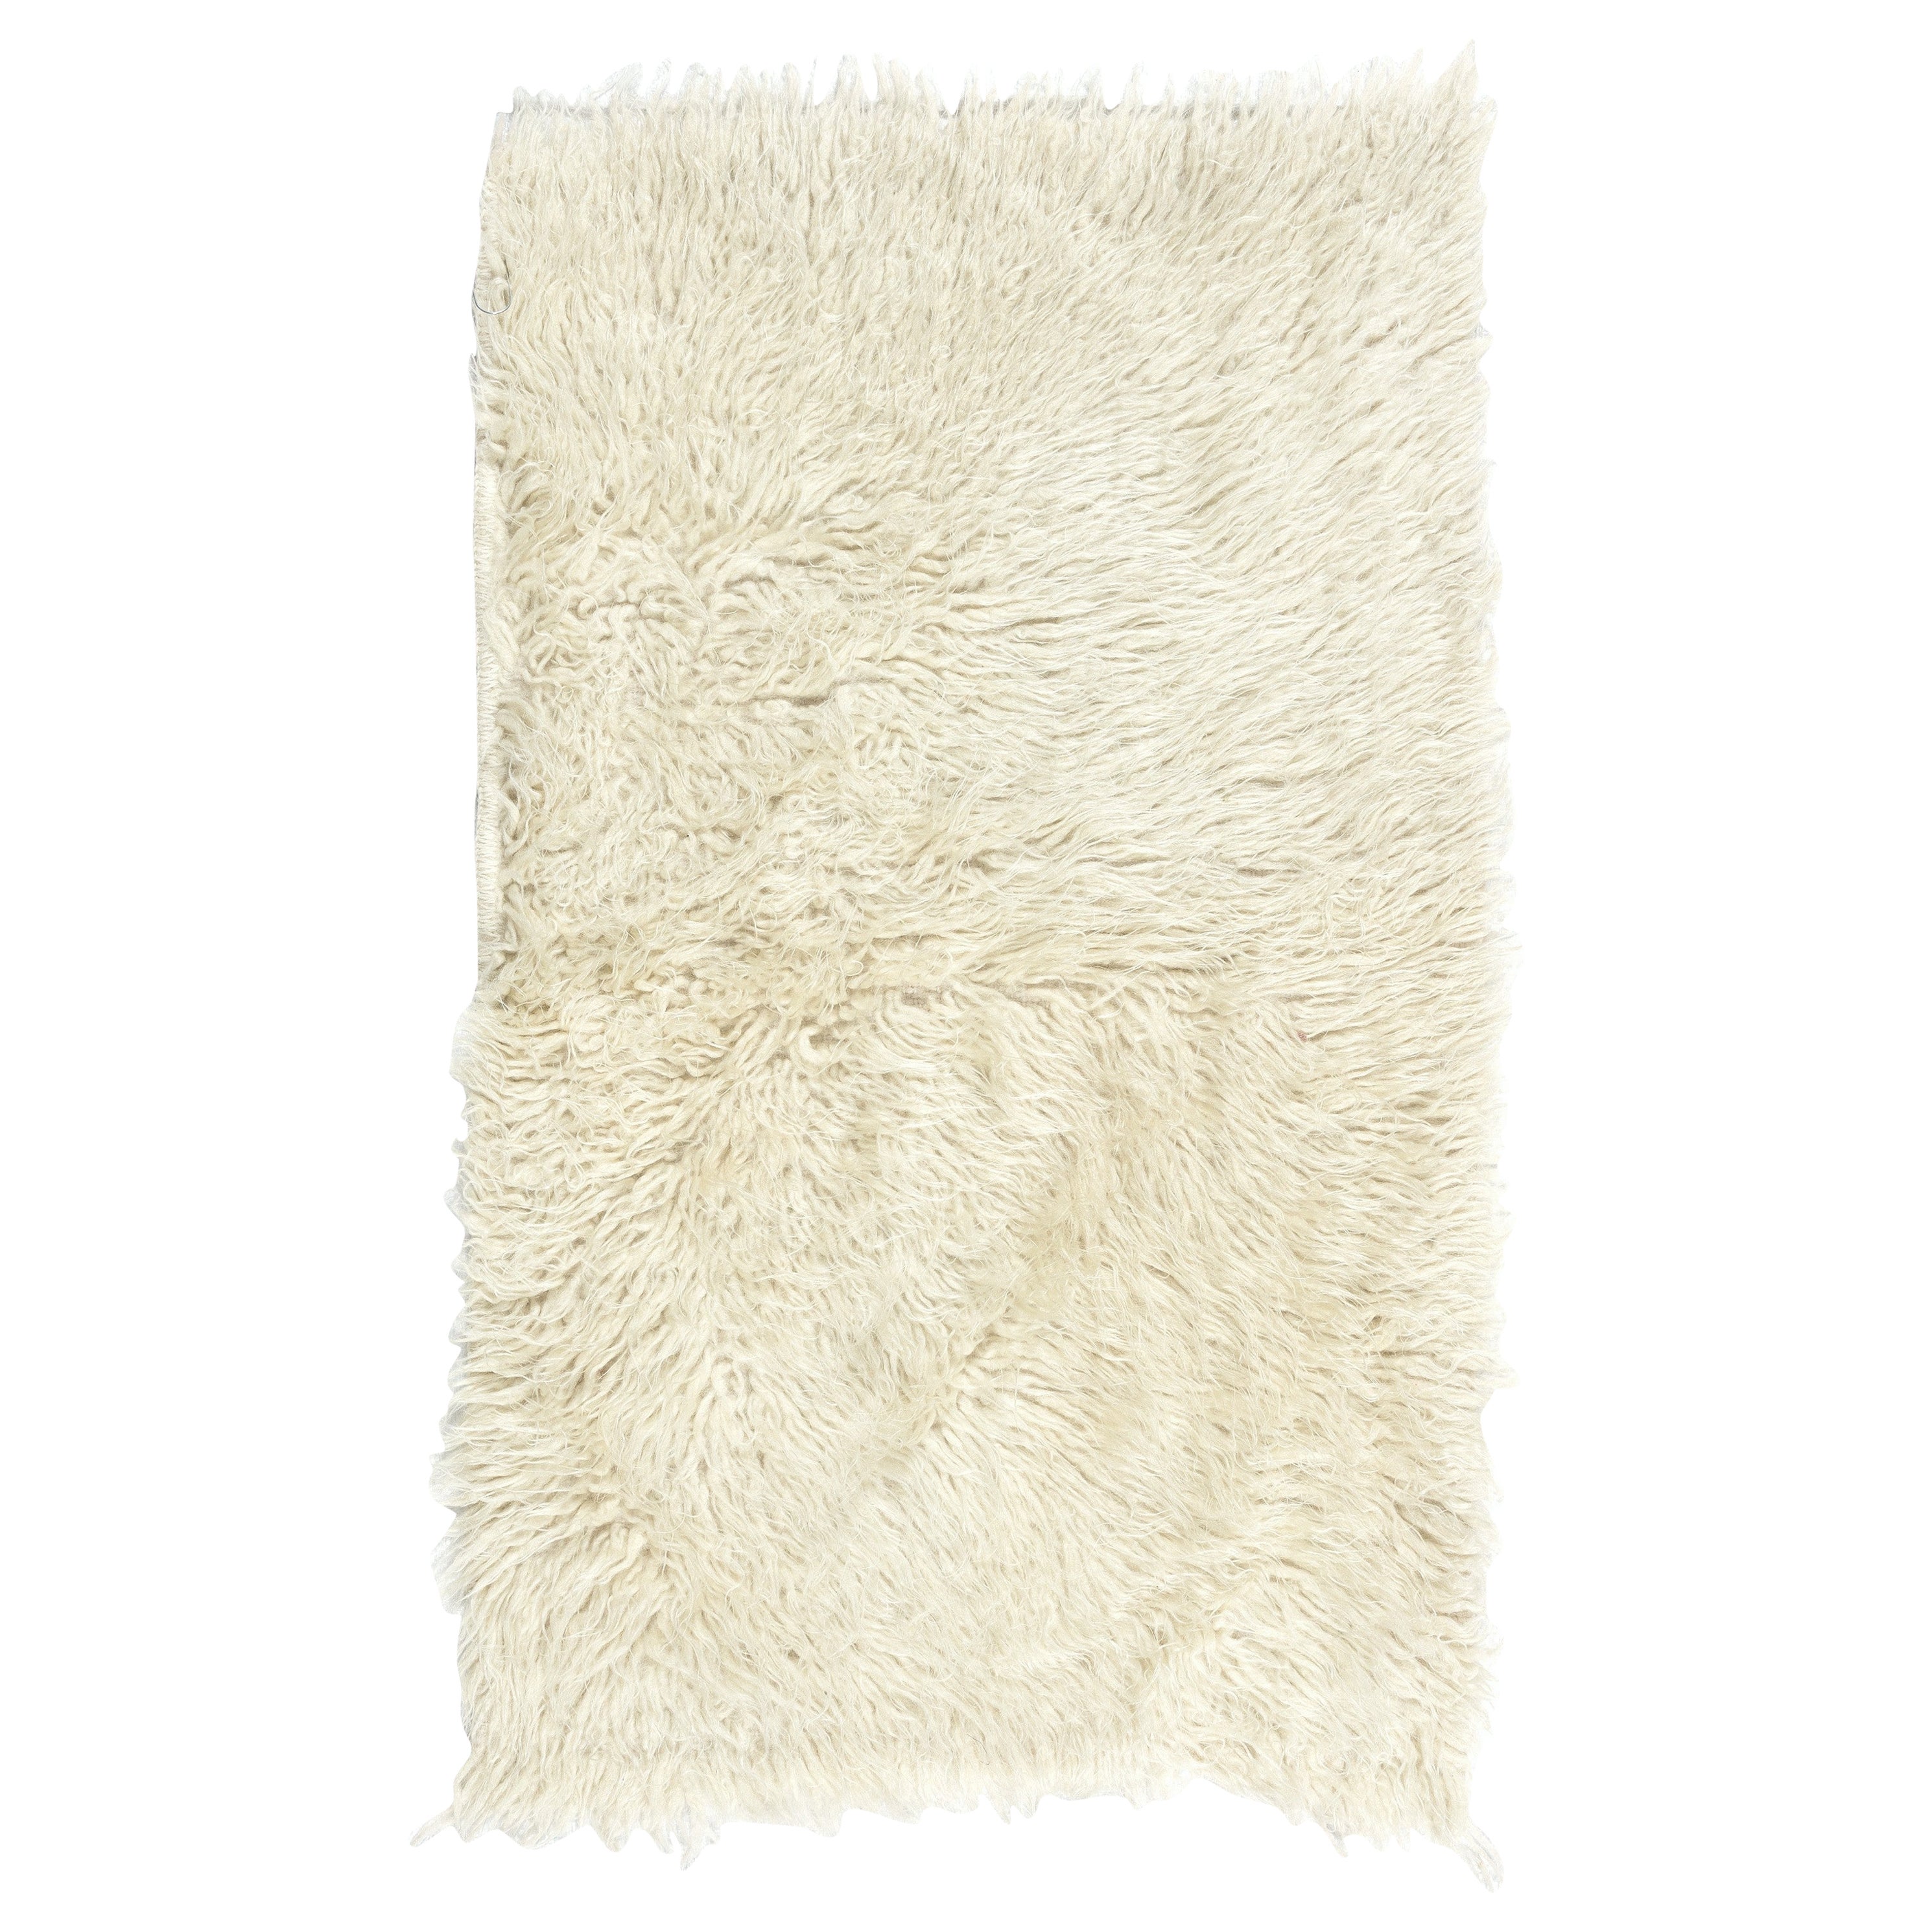 21"x35" Vintage Handmade Shaggy Accent Rug Made of Natural Mohair Wool